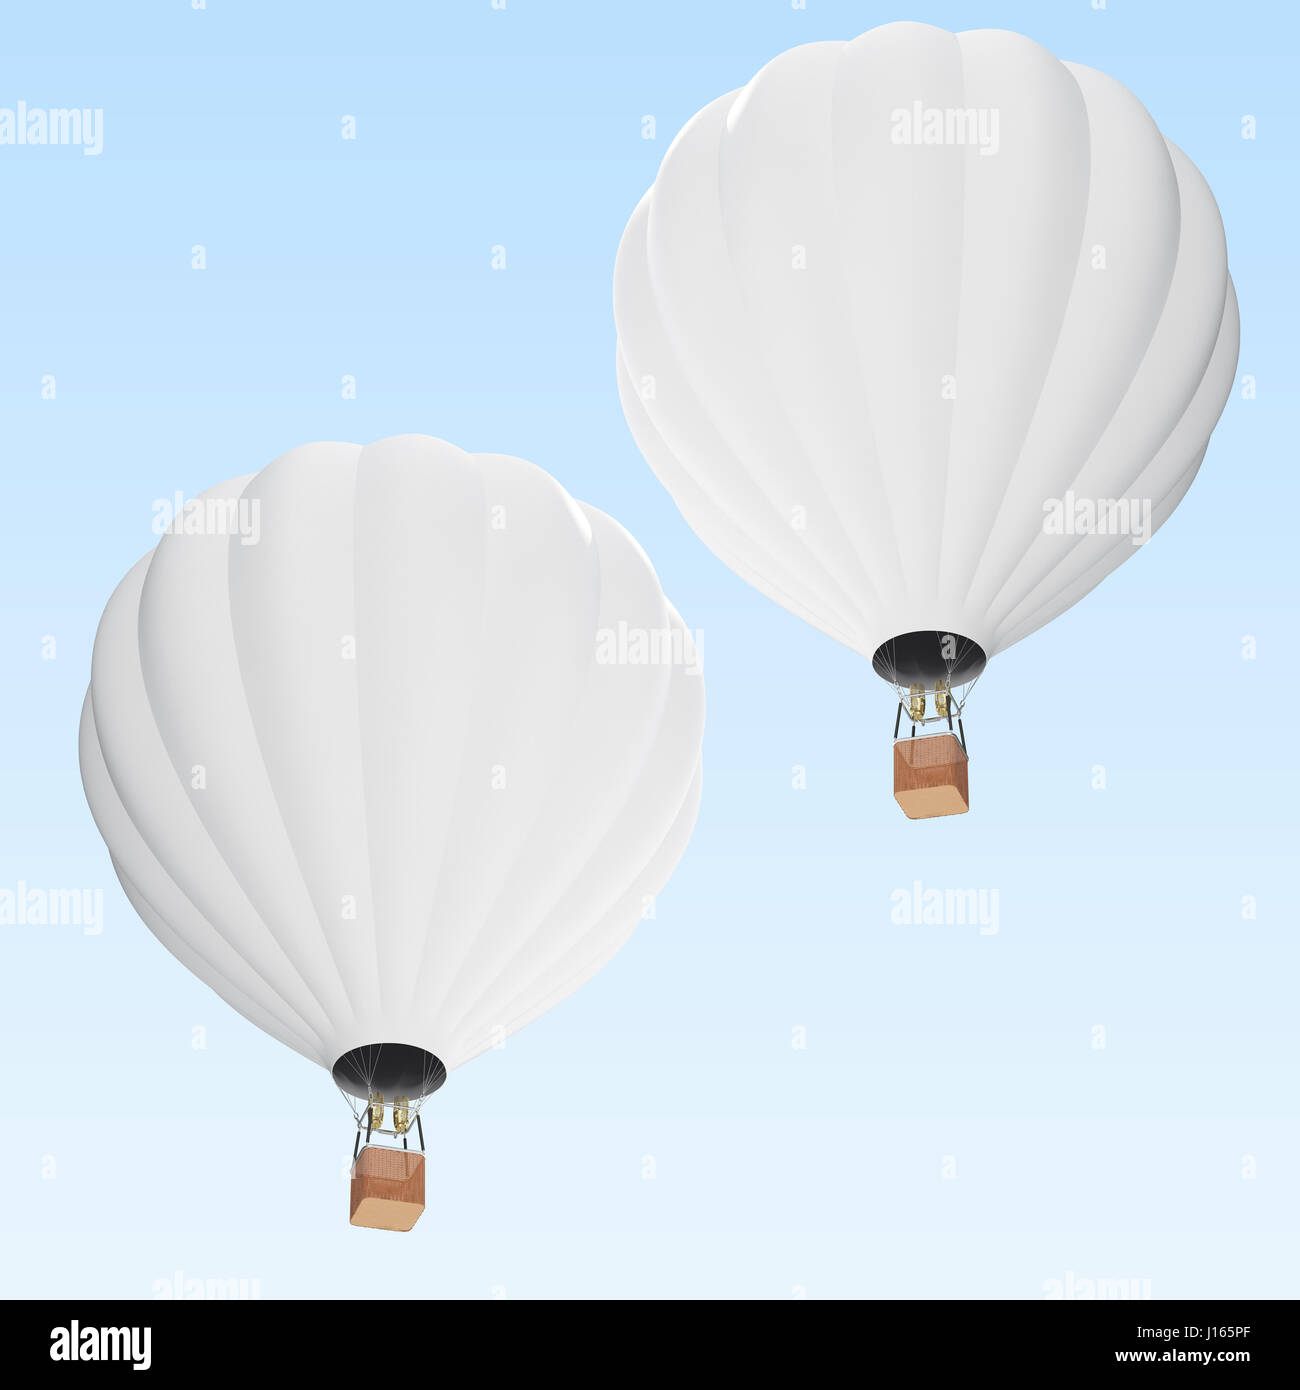 White hot air balloon on clouds background with basket. 3d rendering Stock Photo